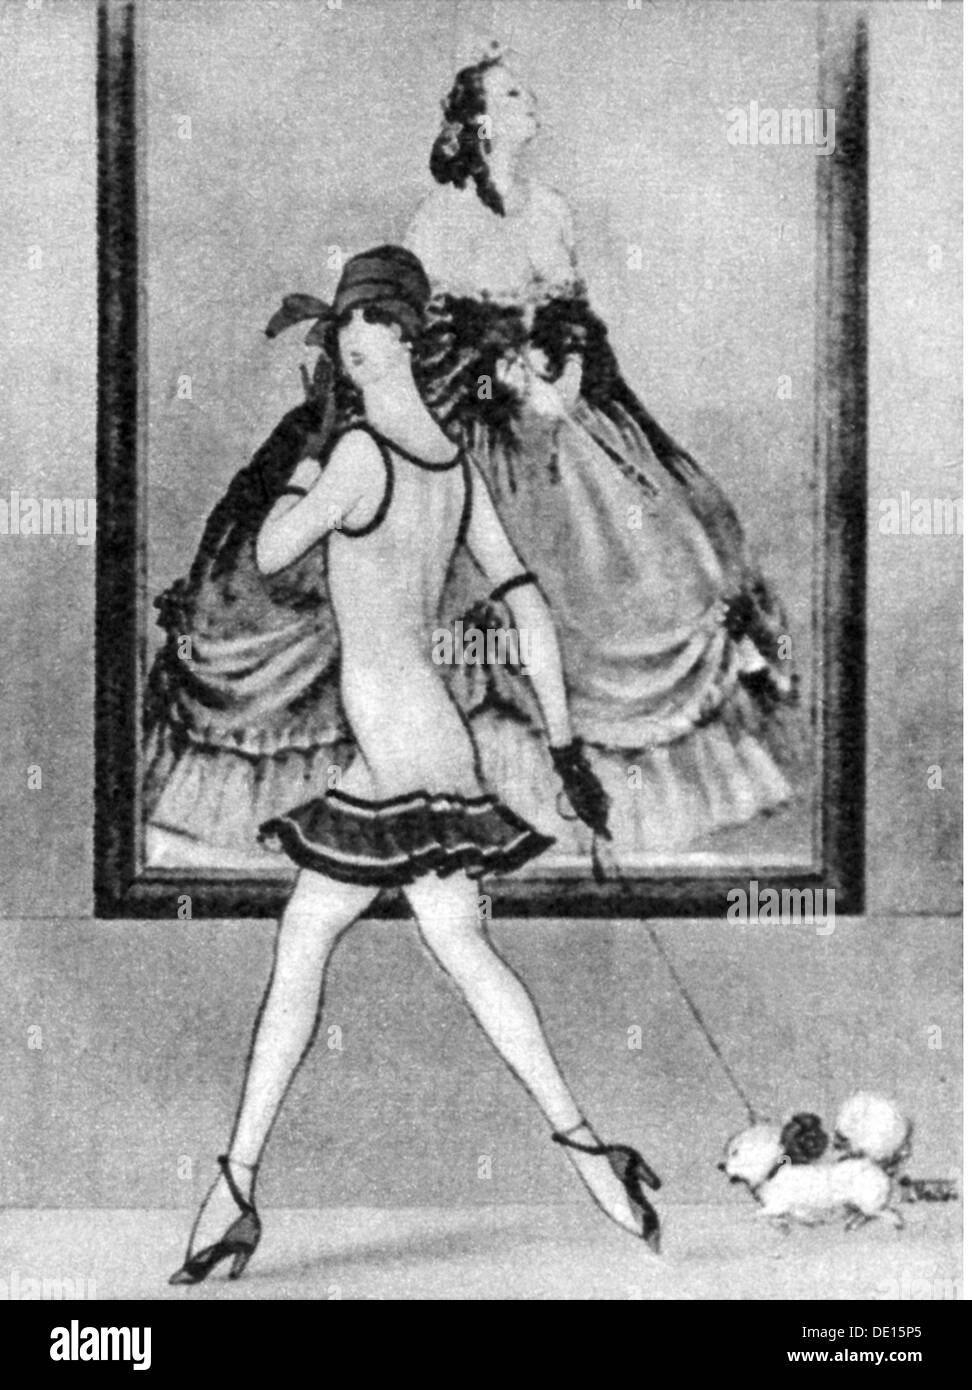 fashion, 1920s, 'Pfui, wie frei!' (Bah, How Explicit!), drawing, Berlin, 1926, Additional-Rights-Clearences-Not Available Stock Photo